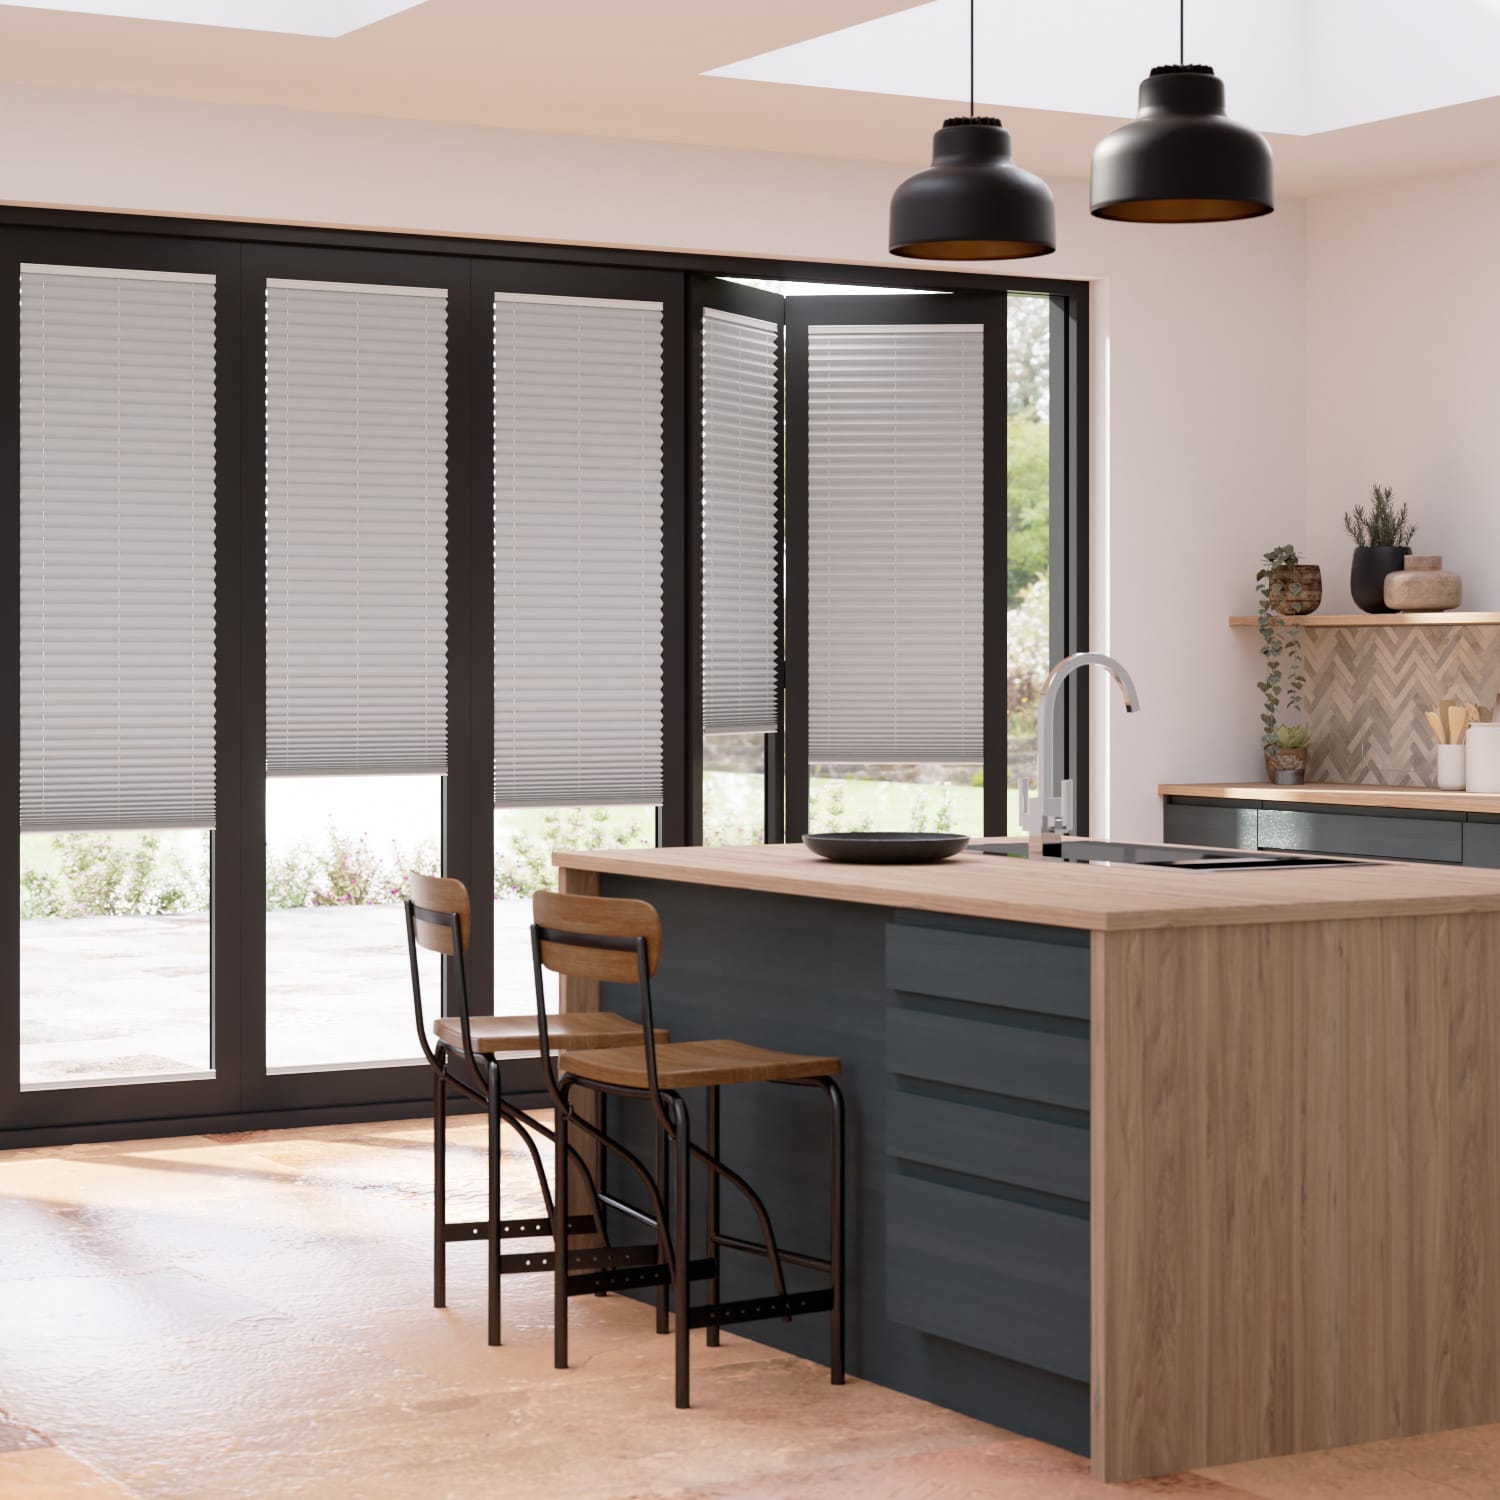 Details about   Pleated Folding Blind Folding Doors Made to Measure Easy Installation ☆ Femi ☆ Bar Silver NEW! show original title 